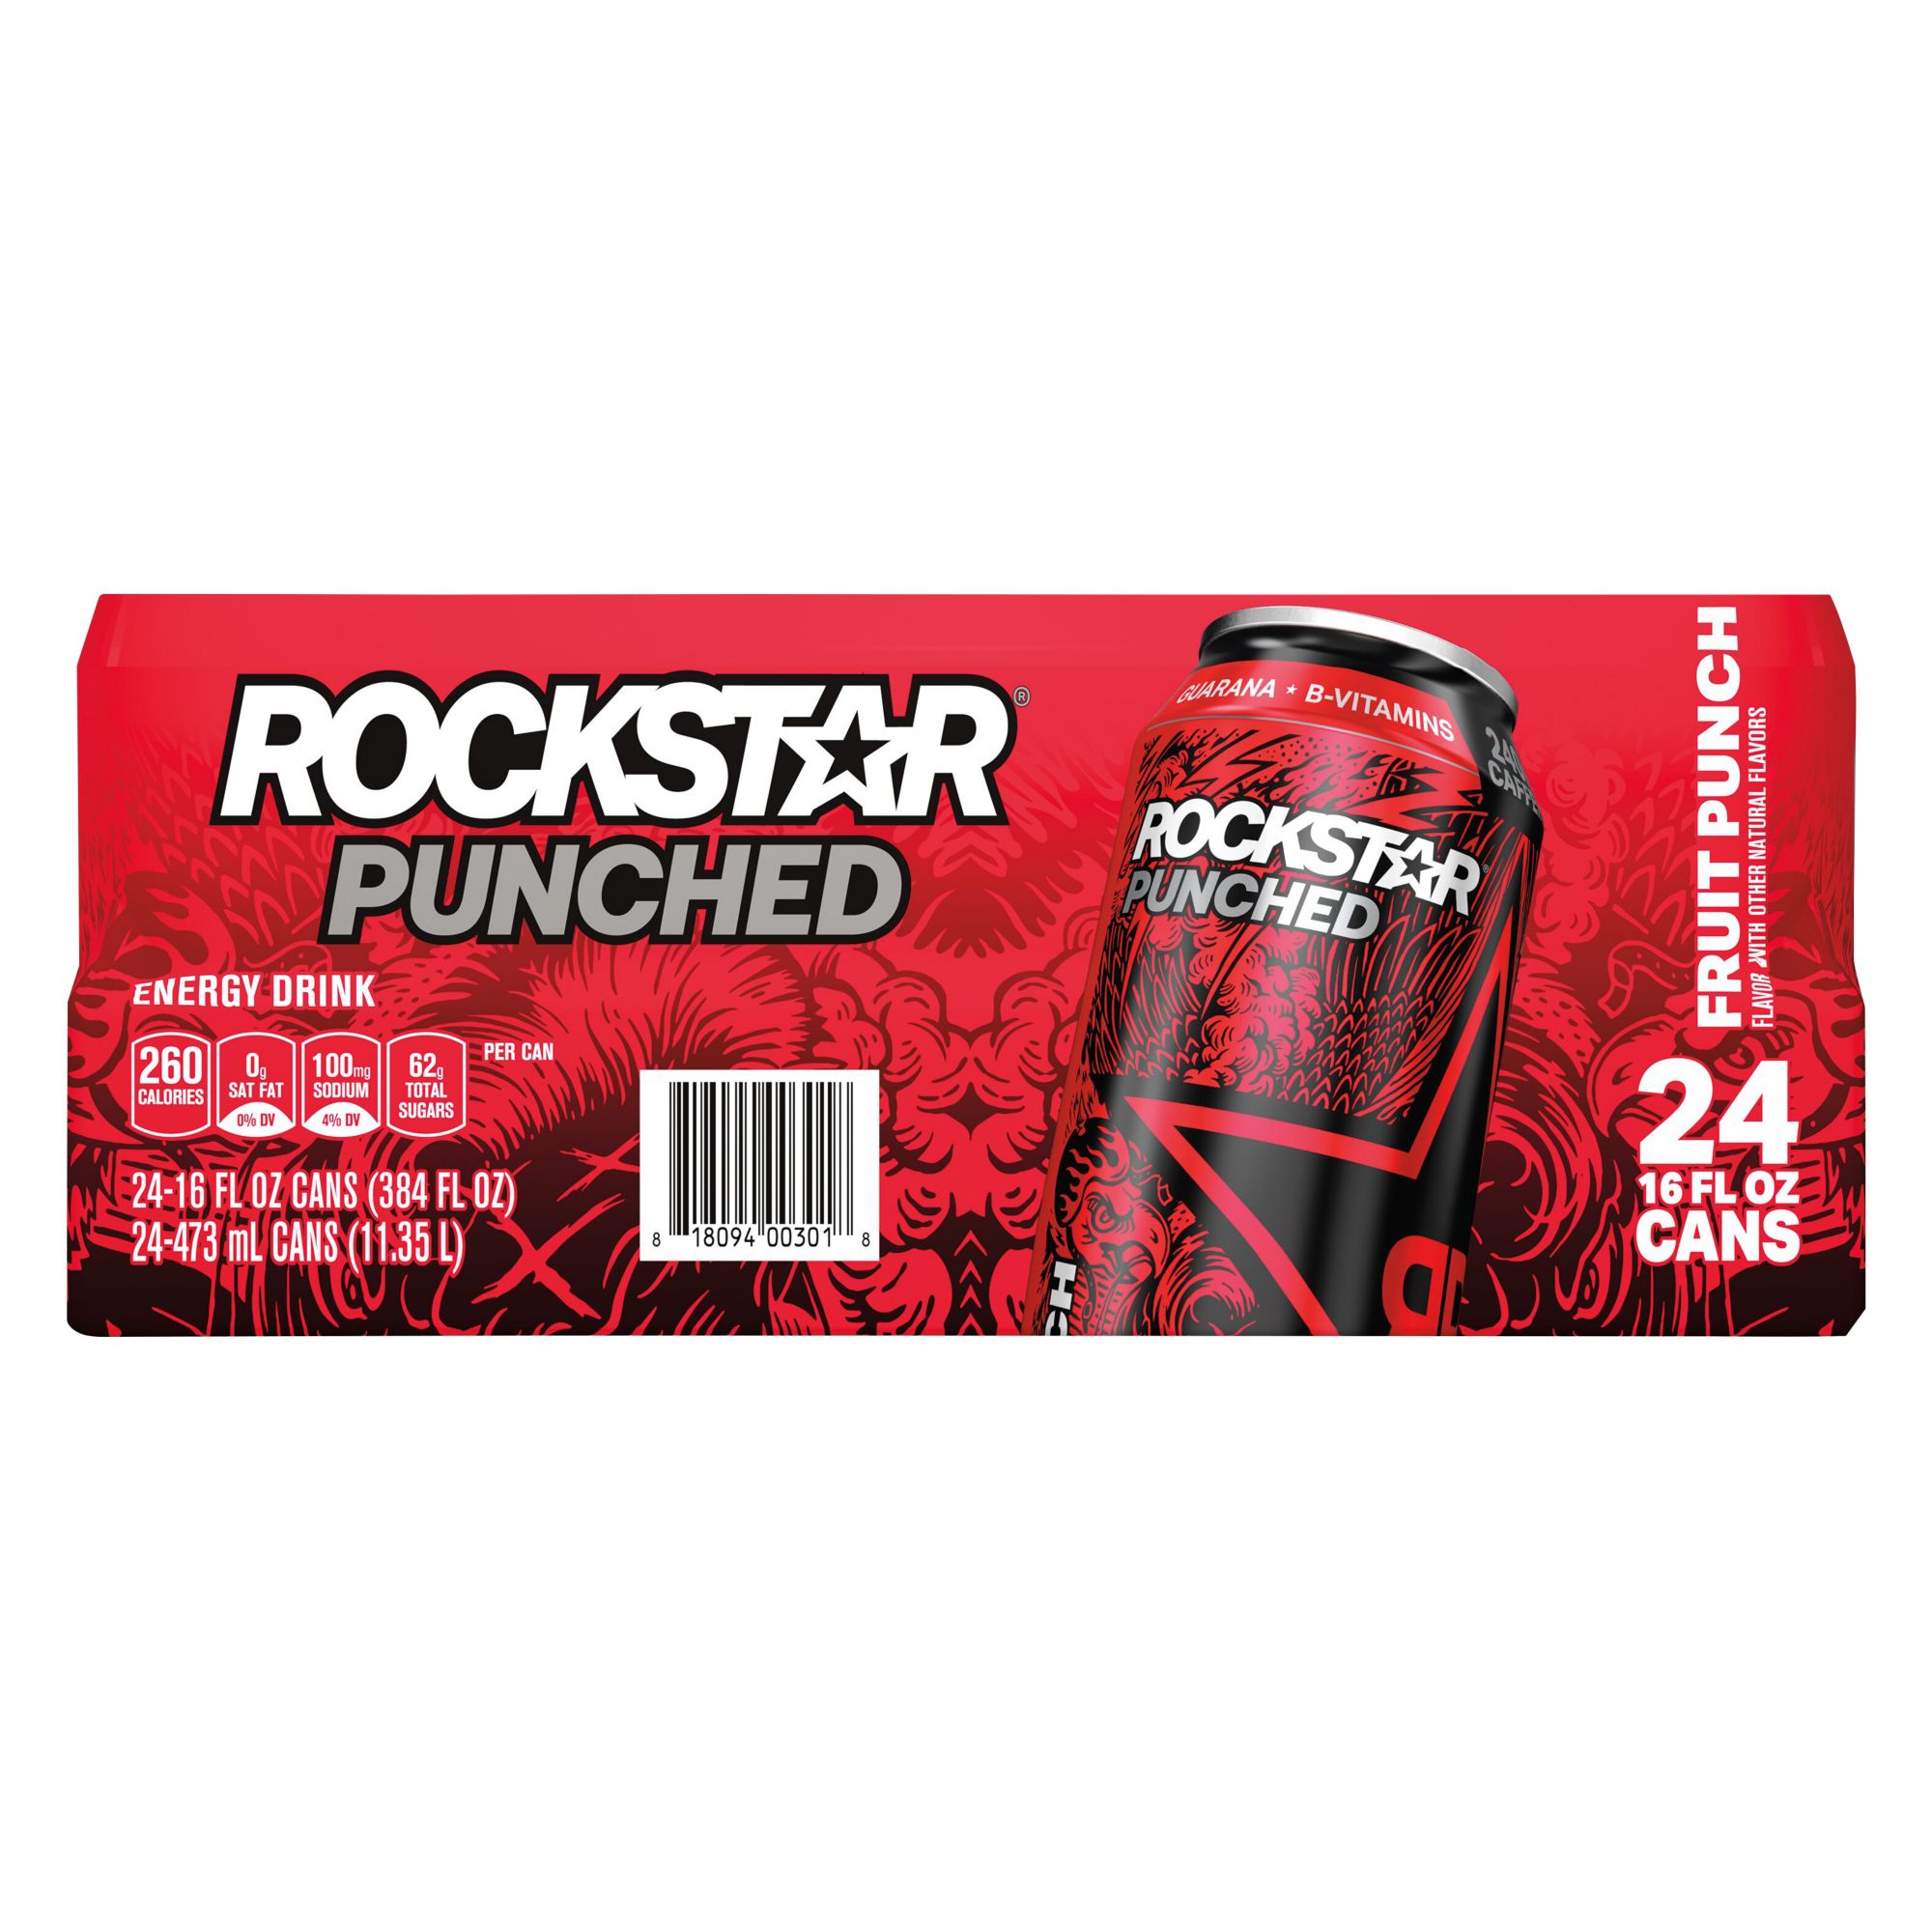 Rockstar Punched Energy, 24 pk./16 oz.